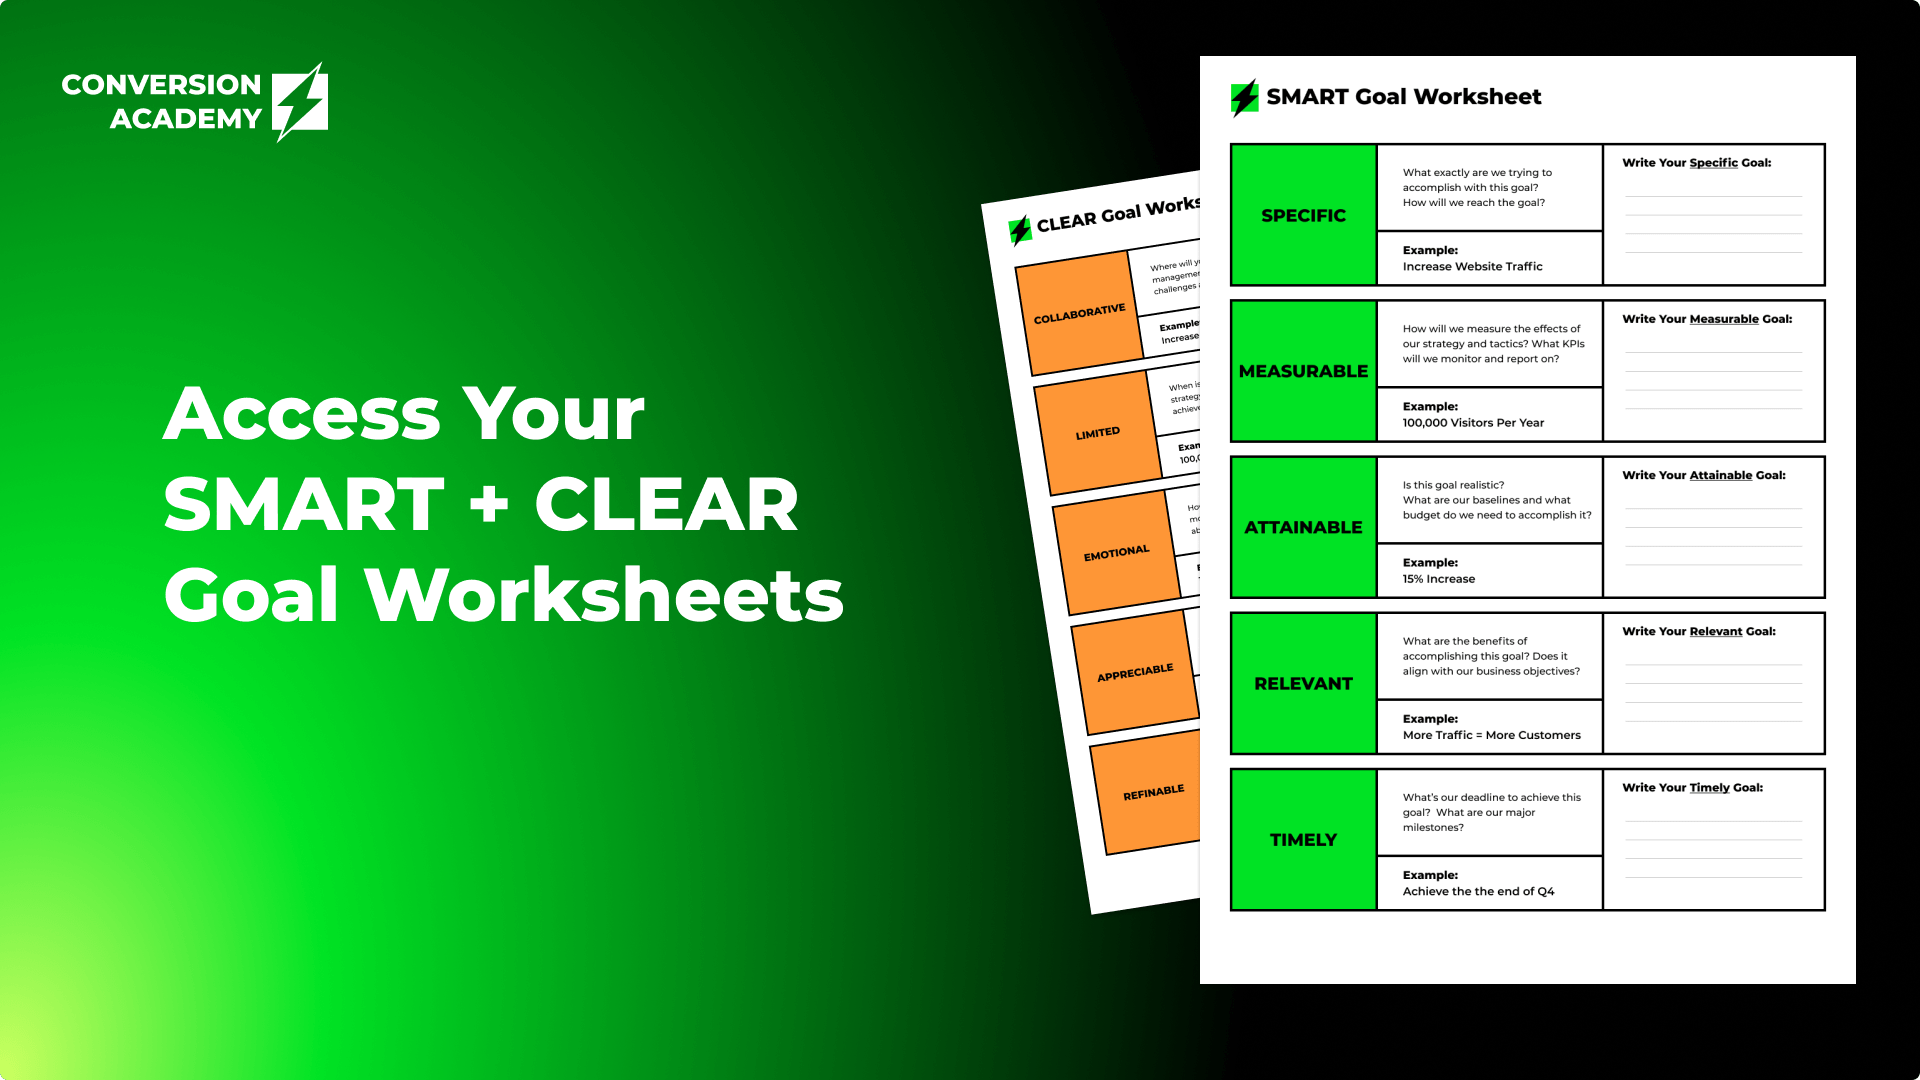 Access Your SMART + CLEAR Goals Worksheets